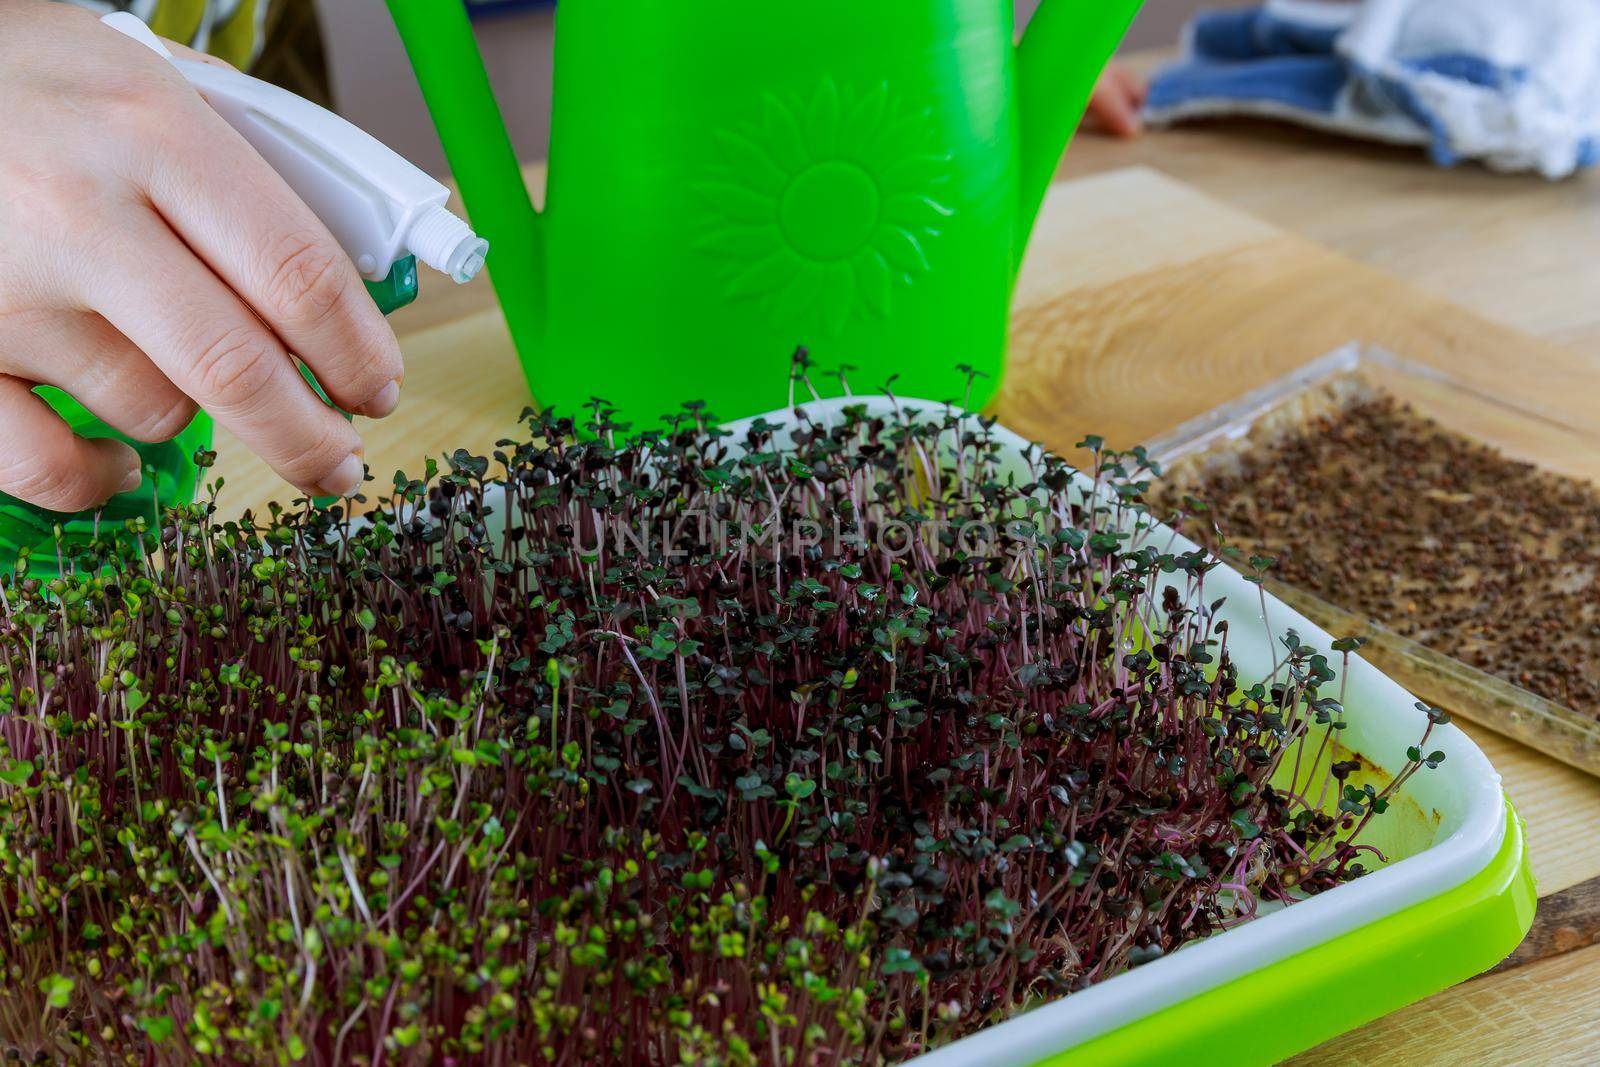 Woman sprays water on green microgreen cabbage in green germination tray on wooden table.